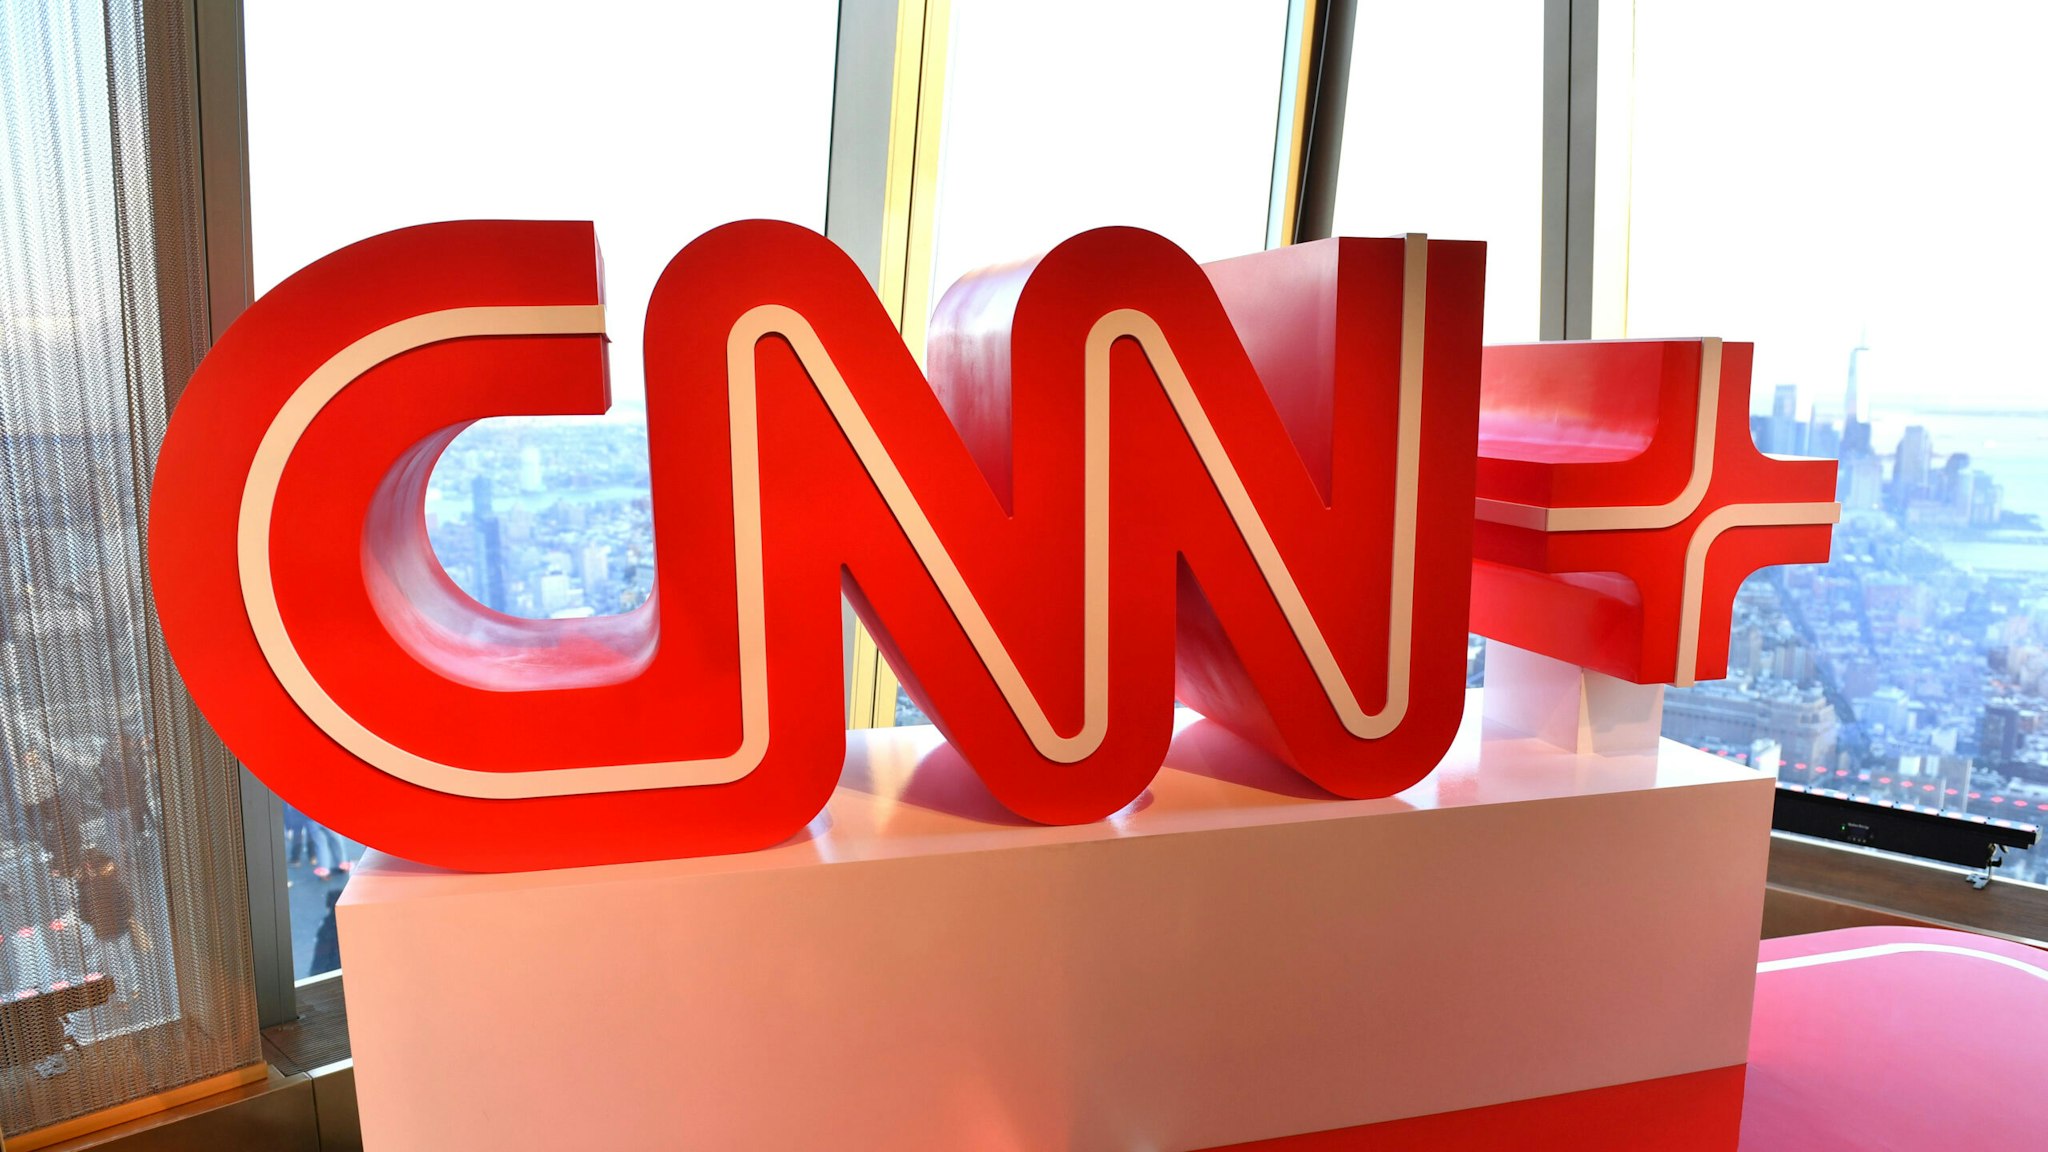 NEW YORK, NEW YORK - MARCH 28: A view of signage on display during the CNN+ Launch Event at PEAK NYC Hudson Yards on March 28, 2022 in New York City.